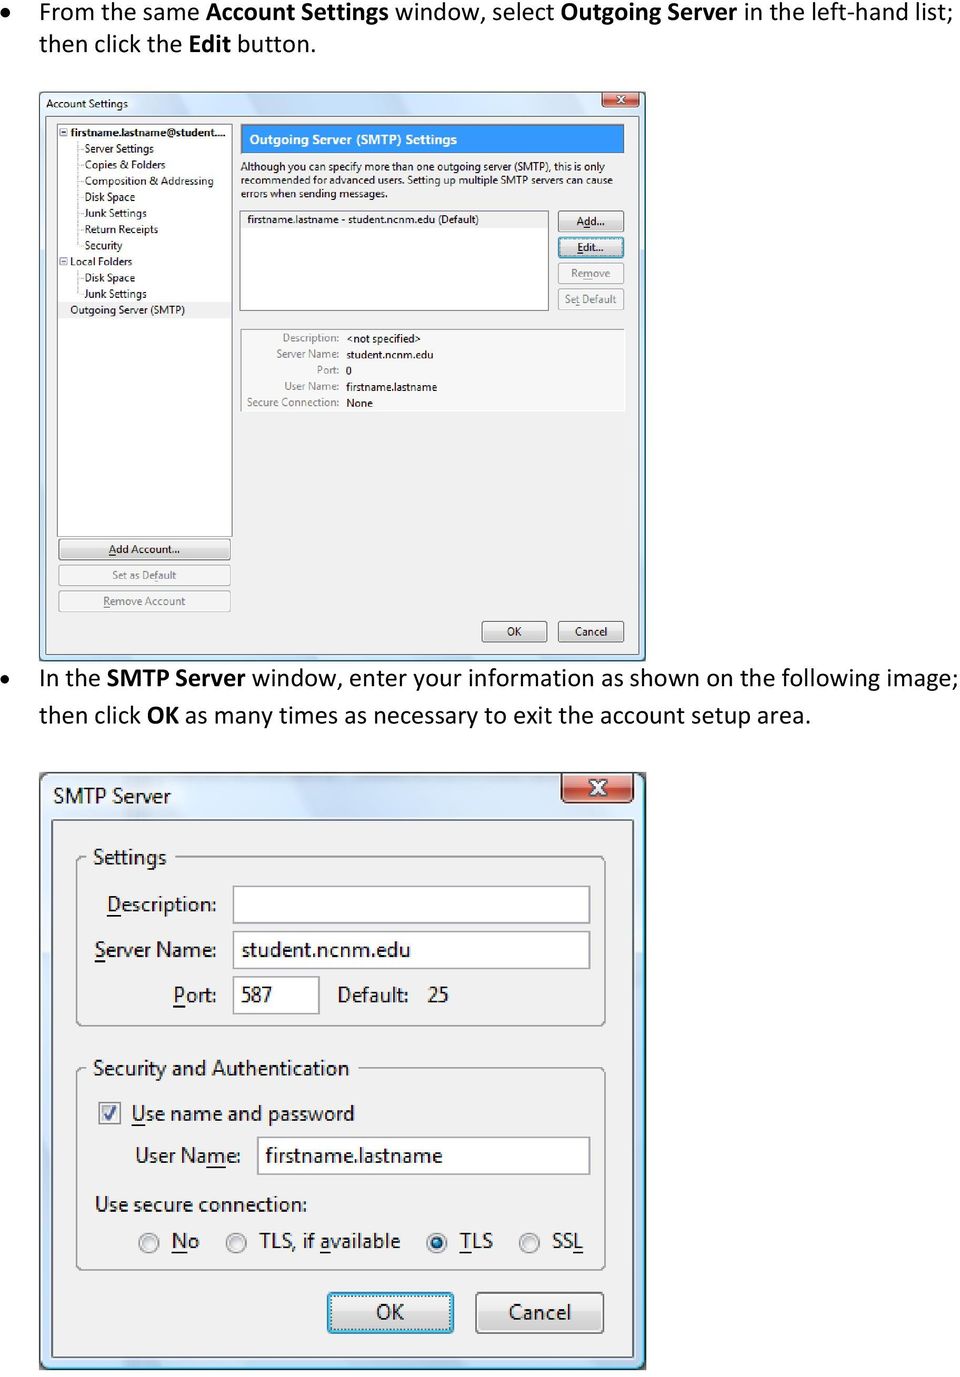 In the SMTP Server window, enter your information as shown on the